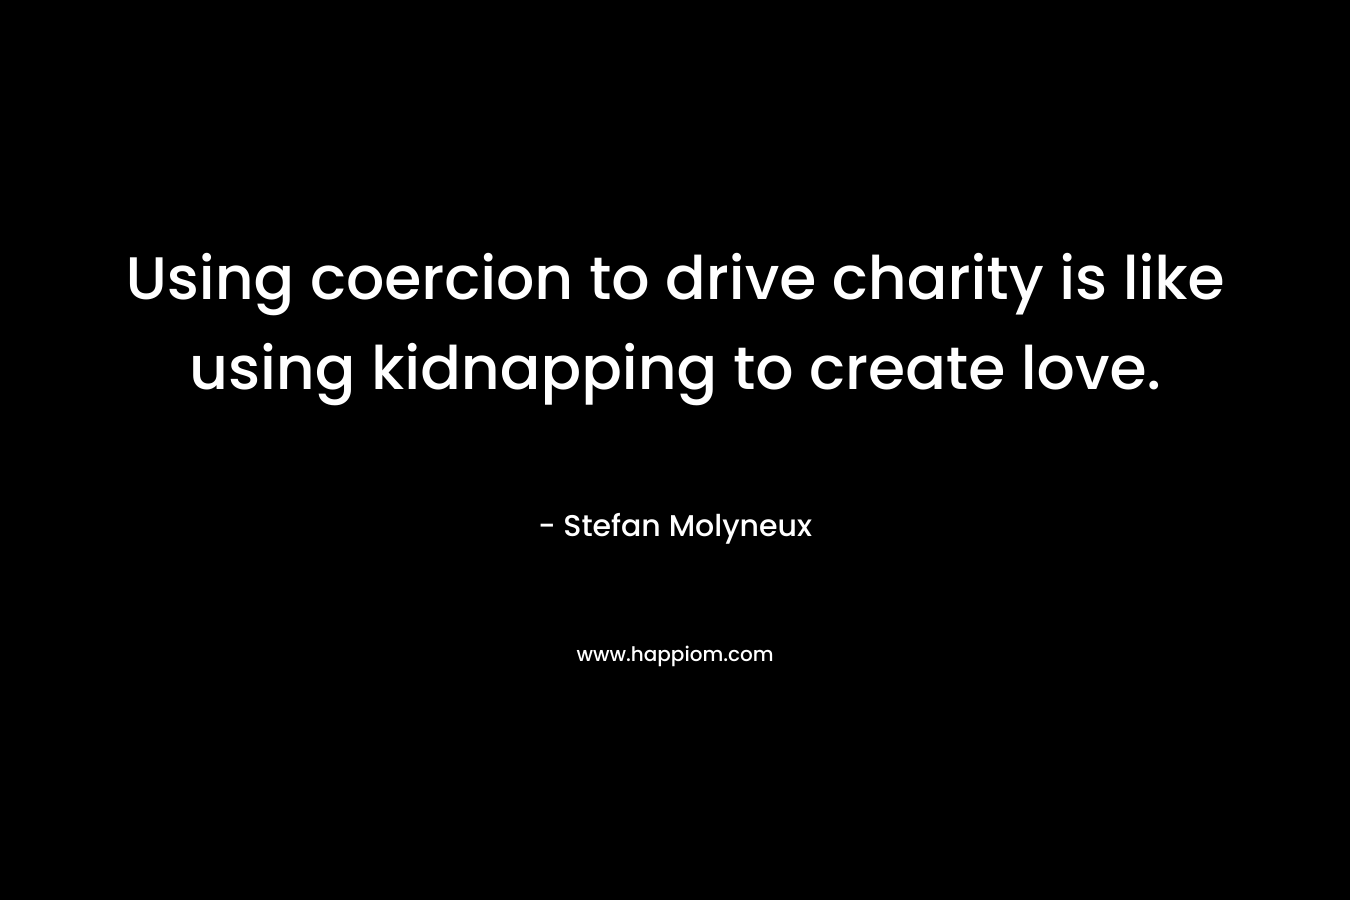 Using coercion to drive charity is like using kidnapping to create love. – Stefan Molyneux